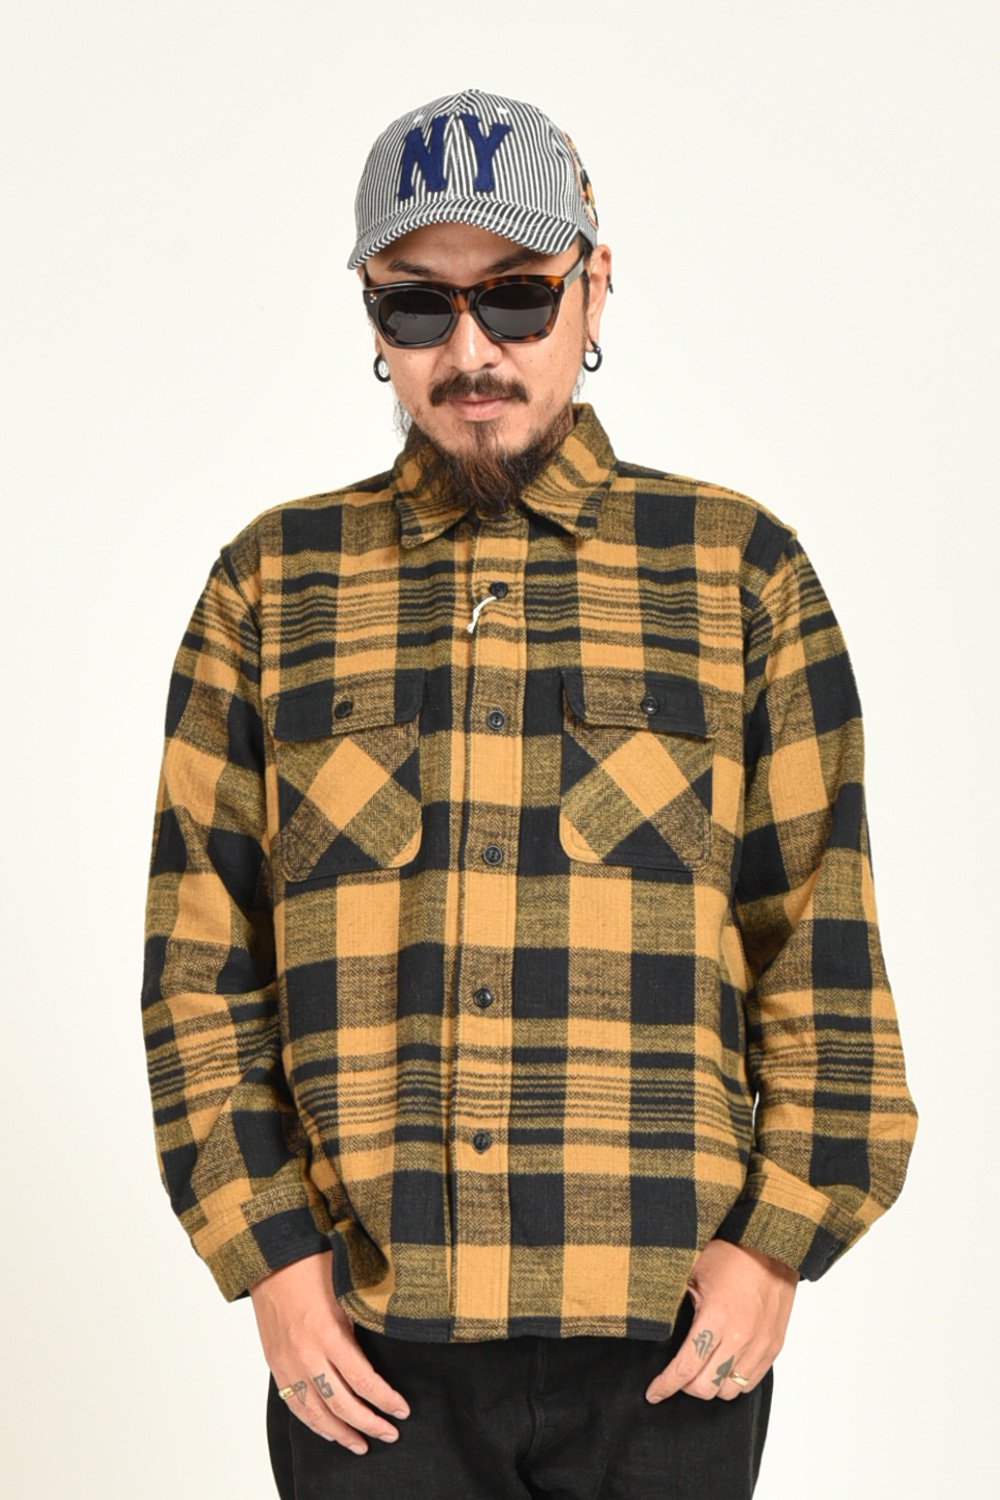 TROPHY CLOTHING(トロフィークロージング) バッファローチェックシャツ Buffalo L/S Shirt TR19AW-403  通販正規取扱 | ハーレムストア公式通販サイト